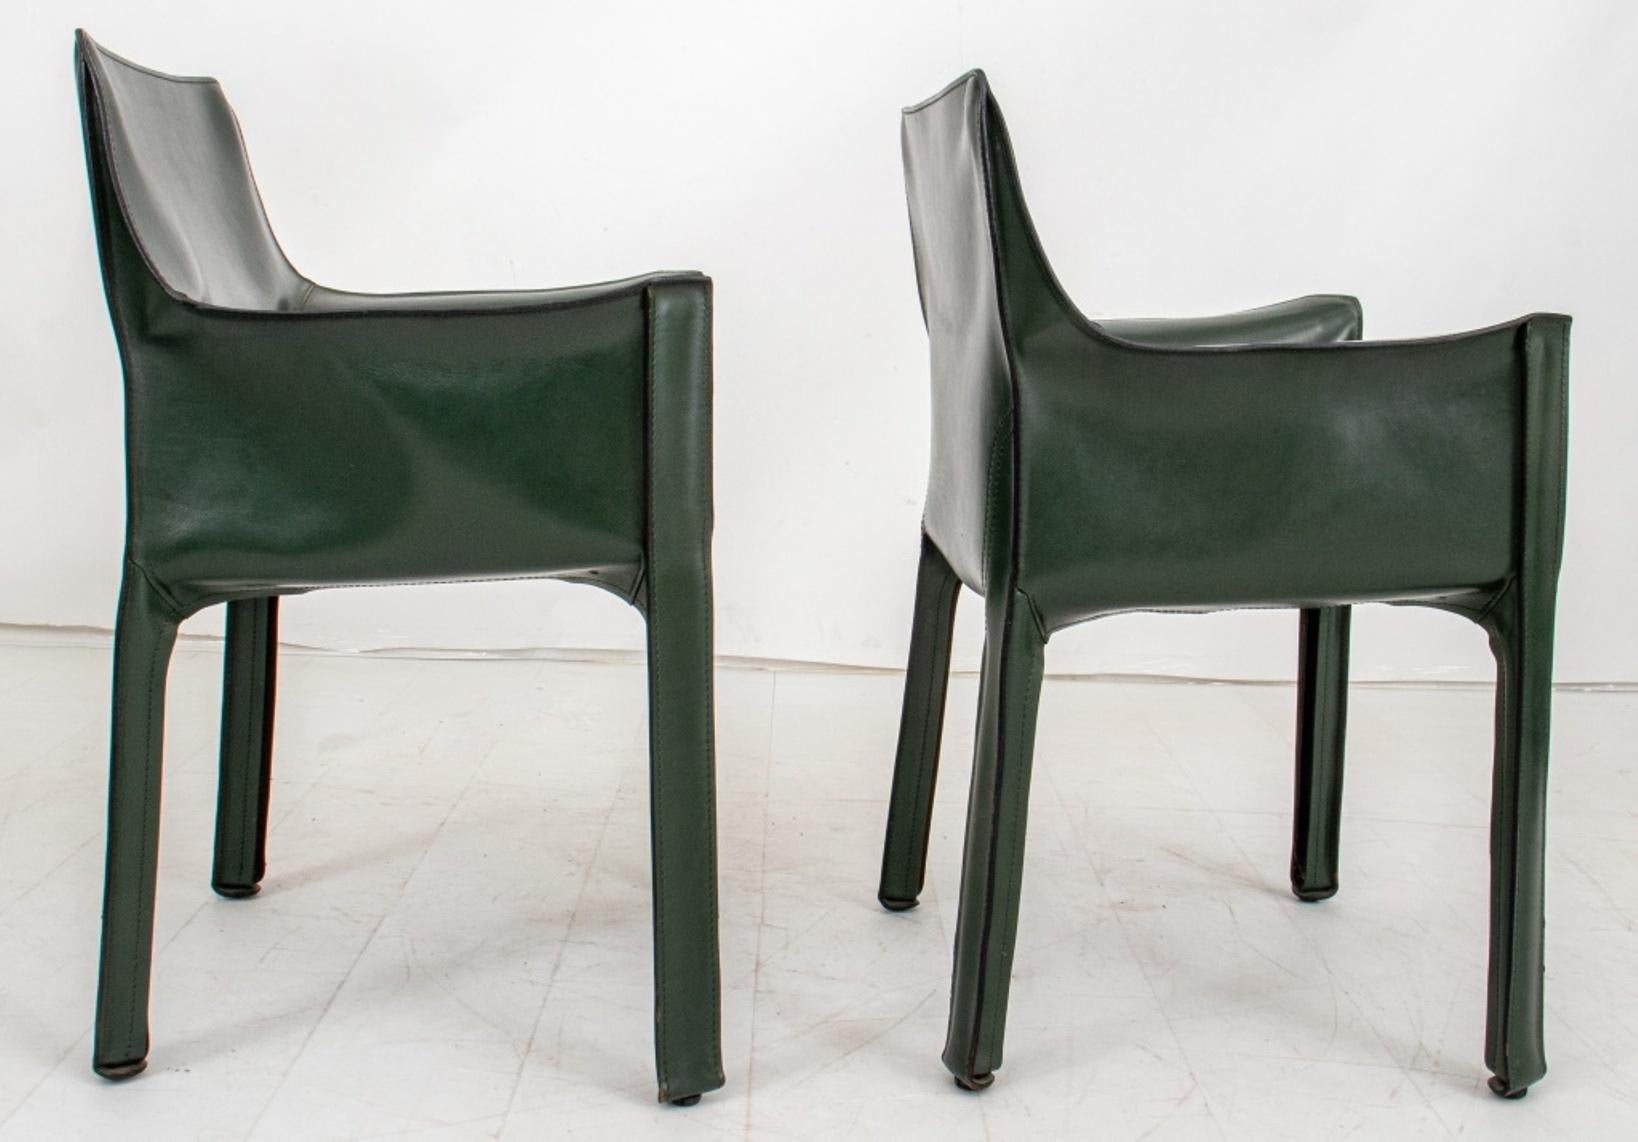 Leather Mario Bellini for Cassina Cab 413 Arm Chairs, Pair